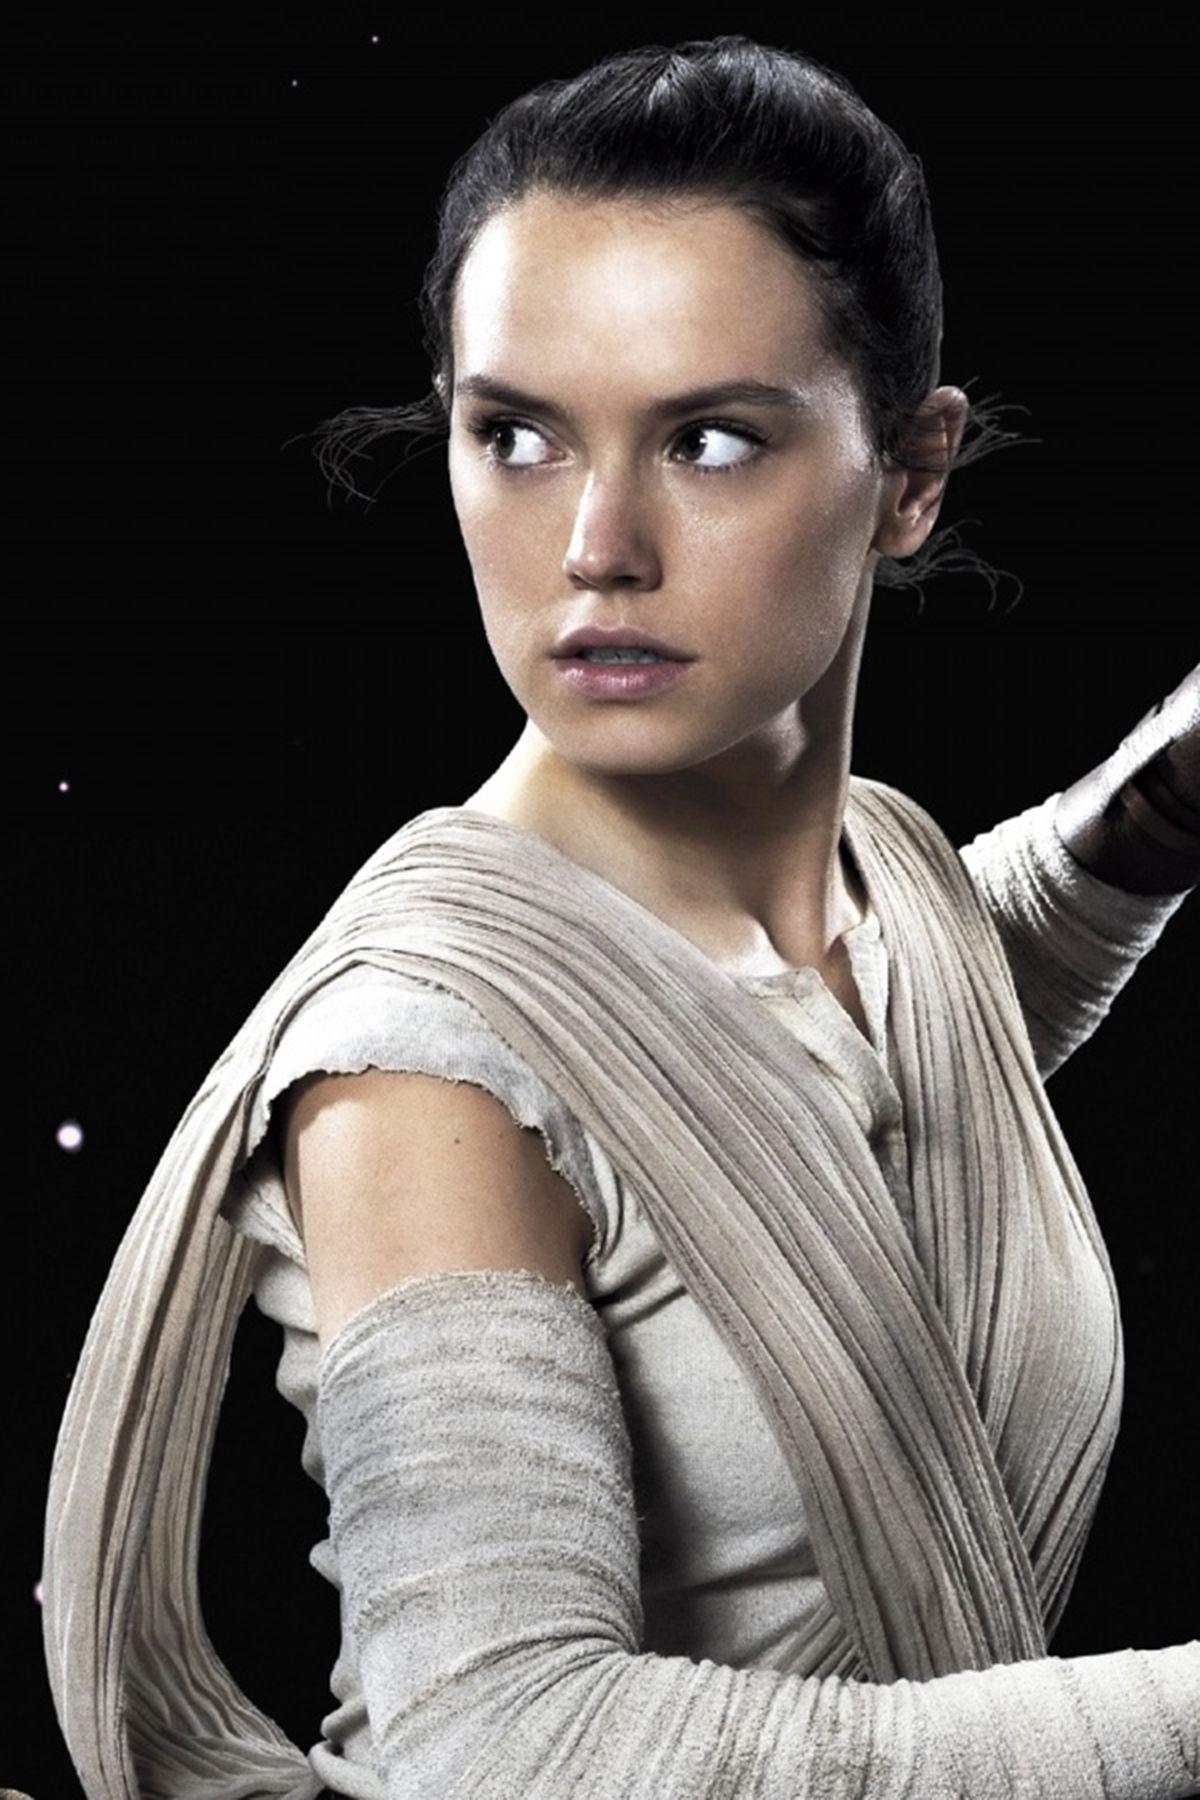 Daisy ridley is sexy